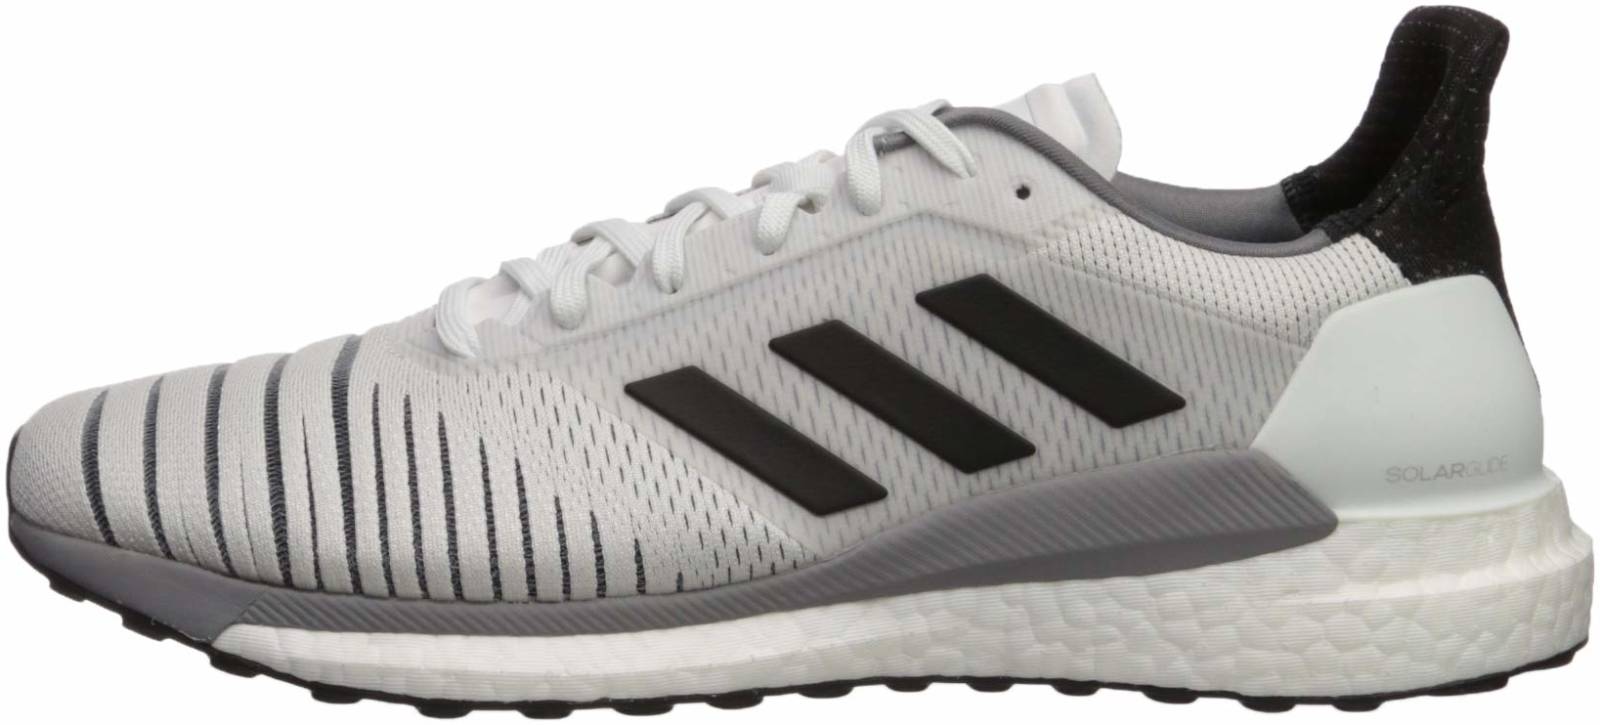 Adidas Solar Glide only $94 + review 